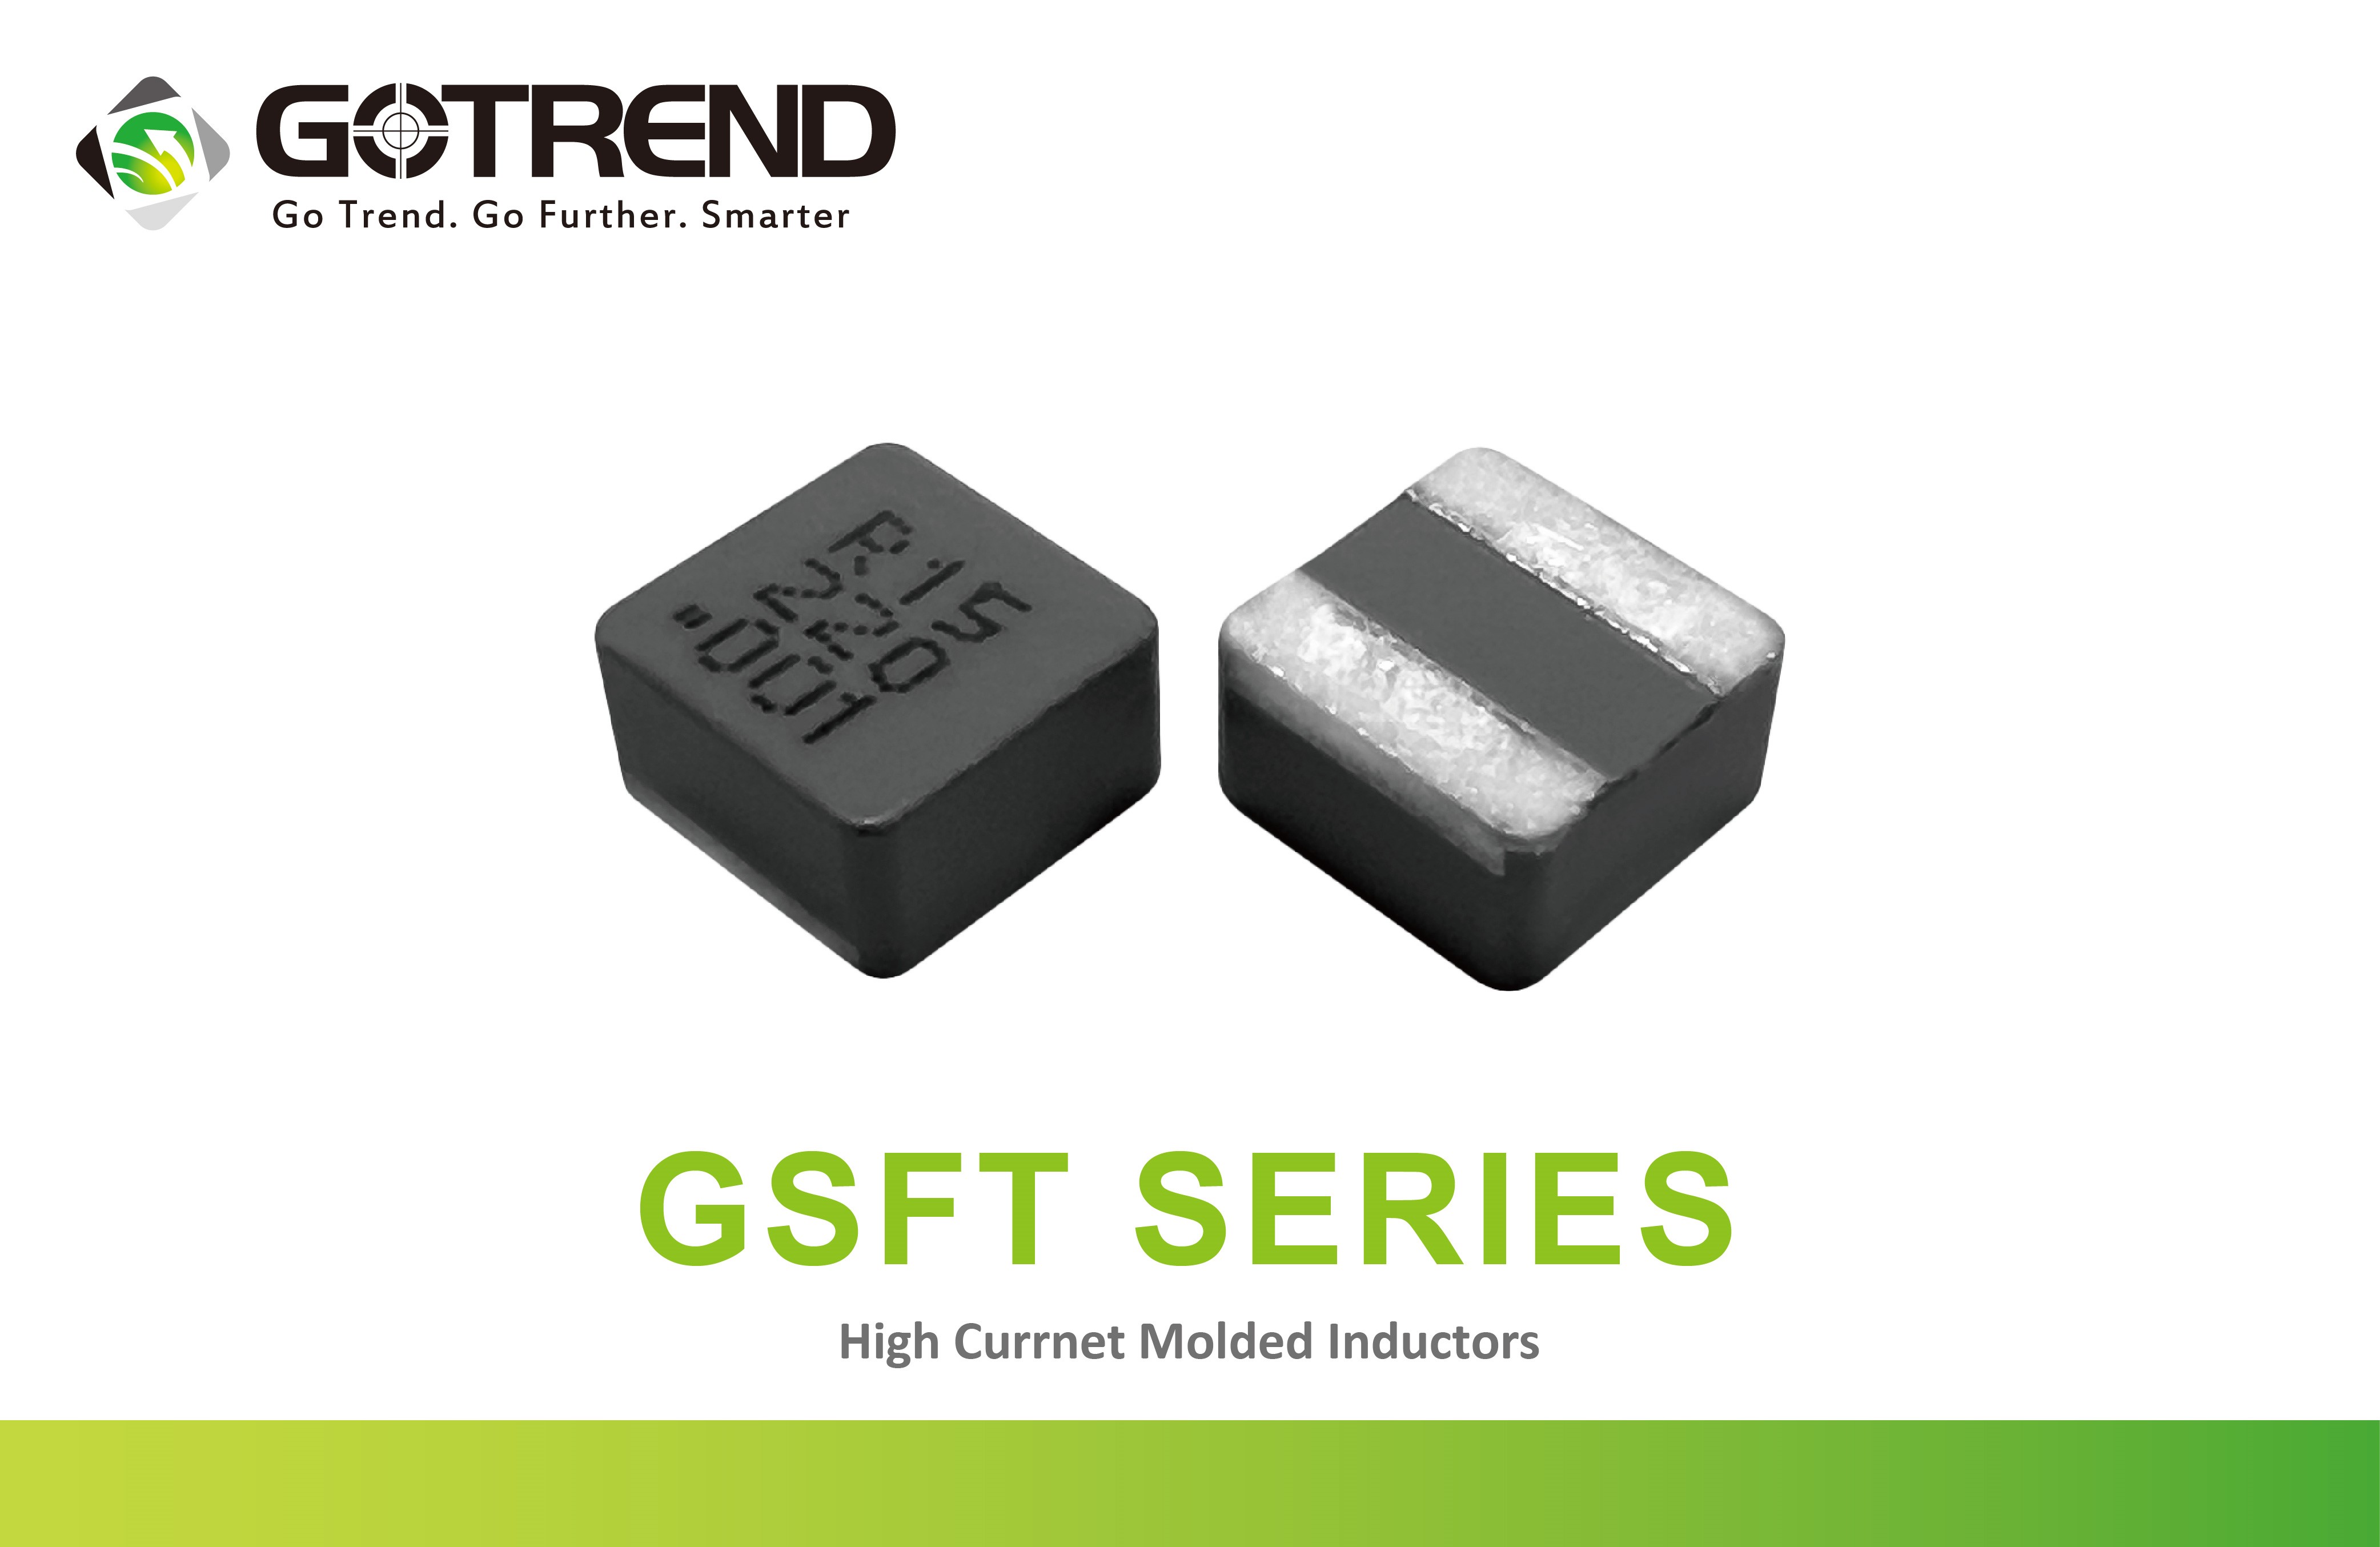 GSFT Series molded power inductors